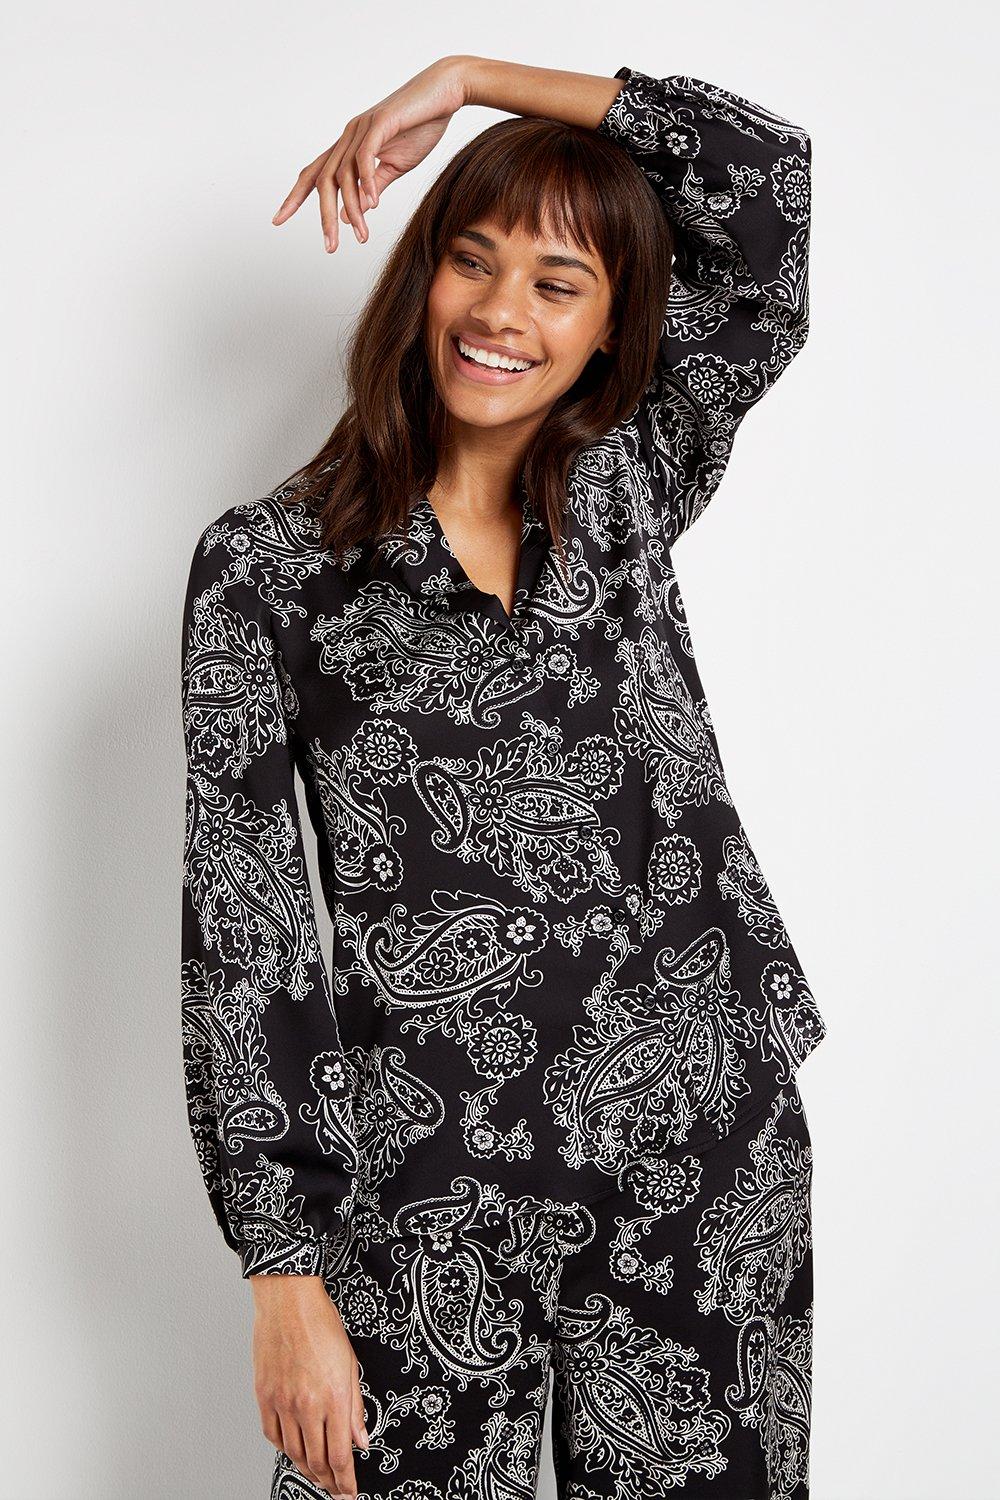 The Stylish Shirt To Add To Your Collection. A Monochrome Colourway Is Chic And Easy To Pair, Whilst An On-Trend Paisley Print And Sleeve Detilaing Bring Added Style. Wear With Jeans And Black Ankle Boots For Easy Everyday Style.  Top V-Neck Buttoned Long